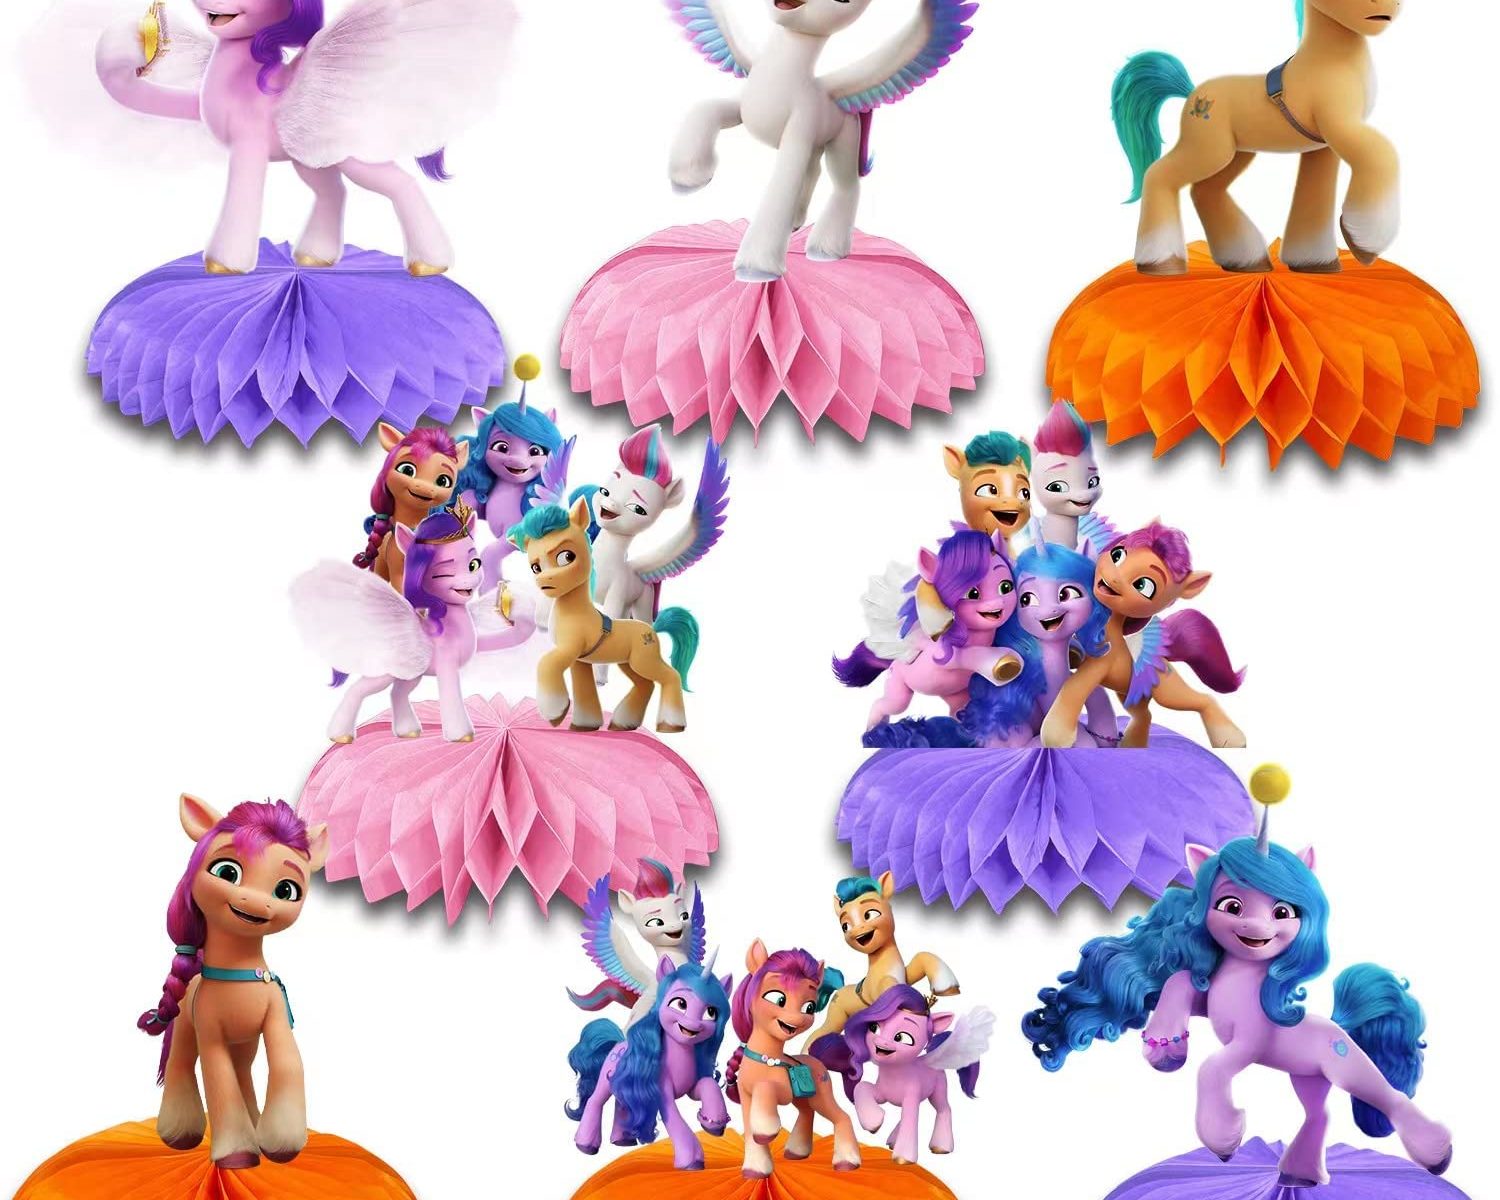 MLP: ANG Birthday Party Honeycomb Centerpieces 8-Pack 1